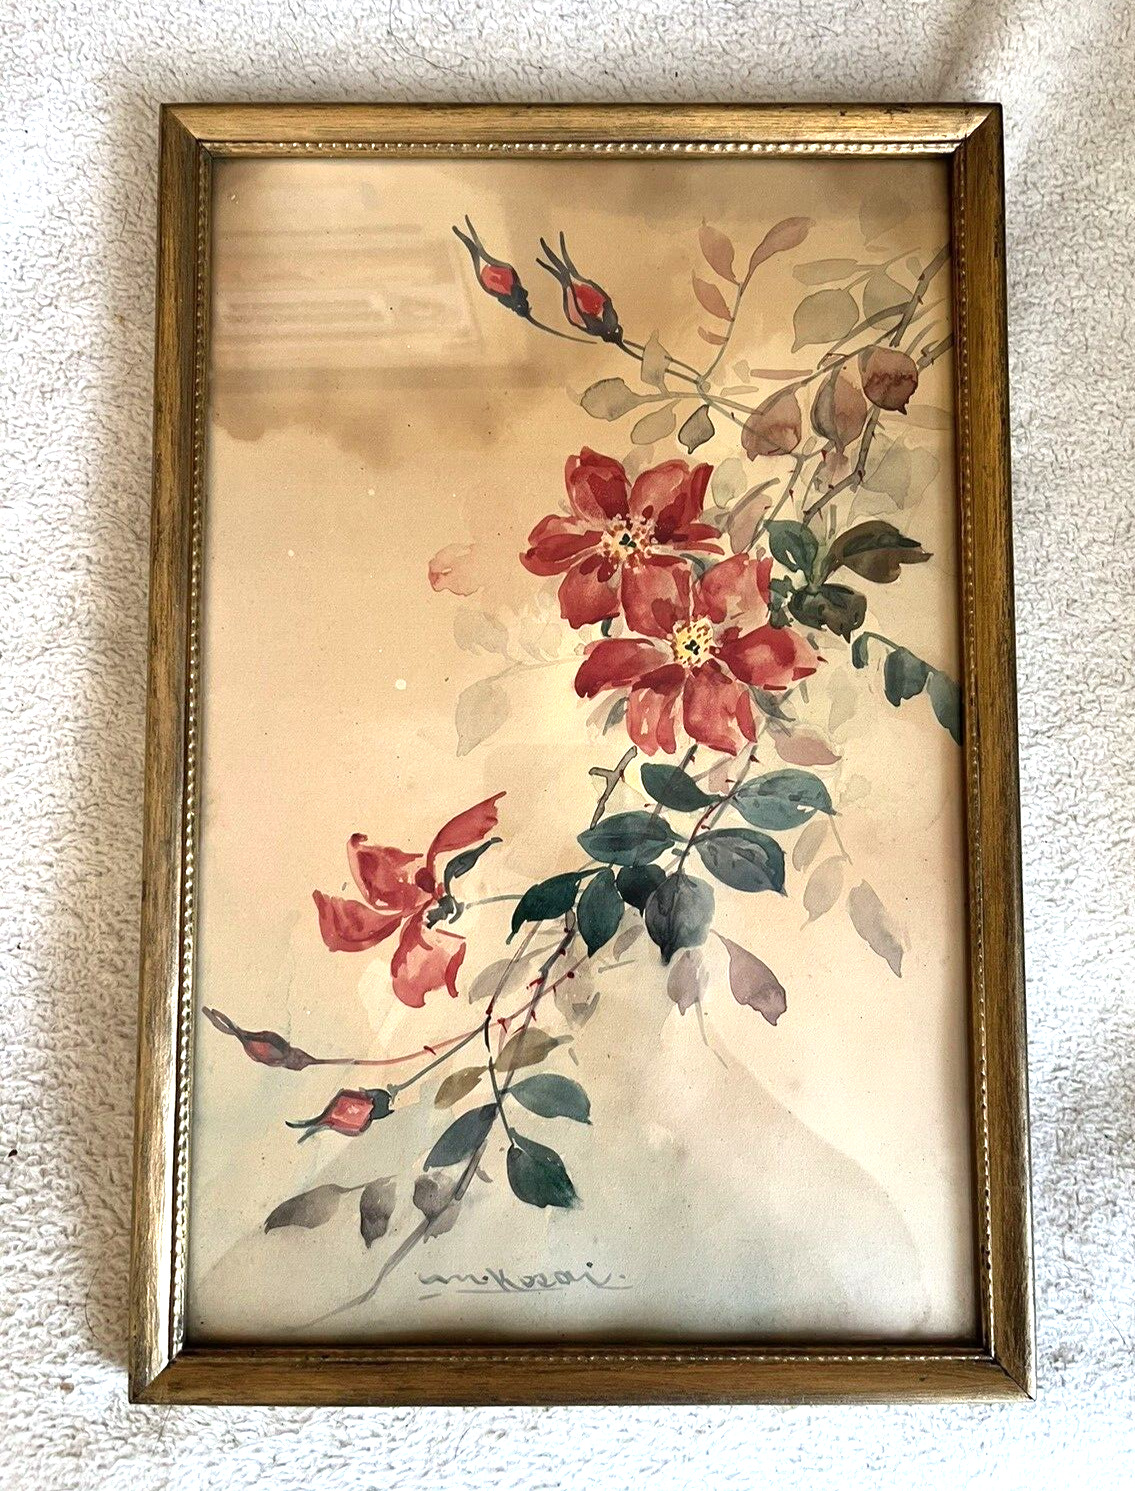 Antique Signed Asian Floral Watercolor Painting Gold Tone Framed 13